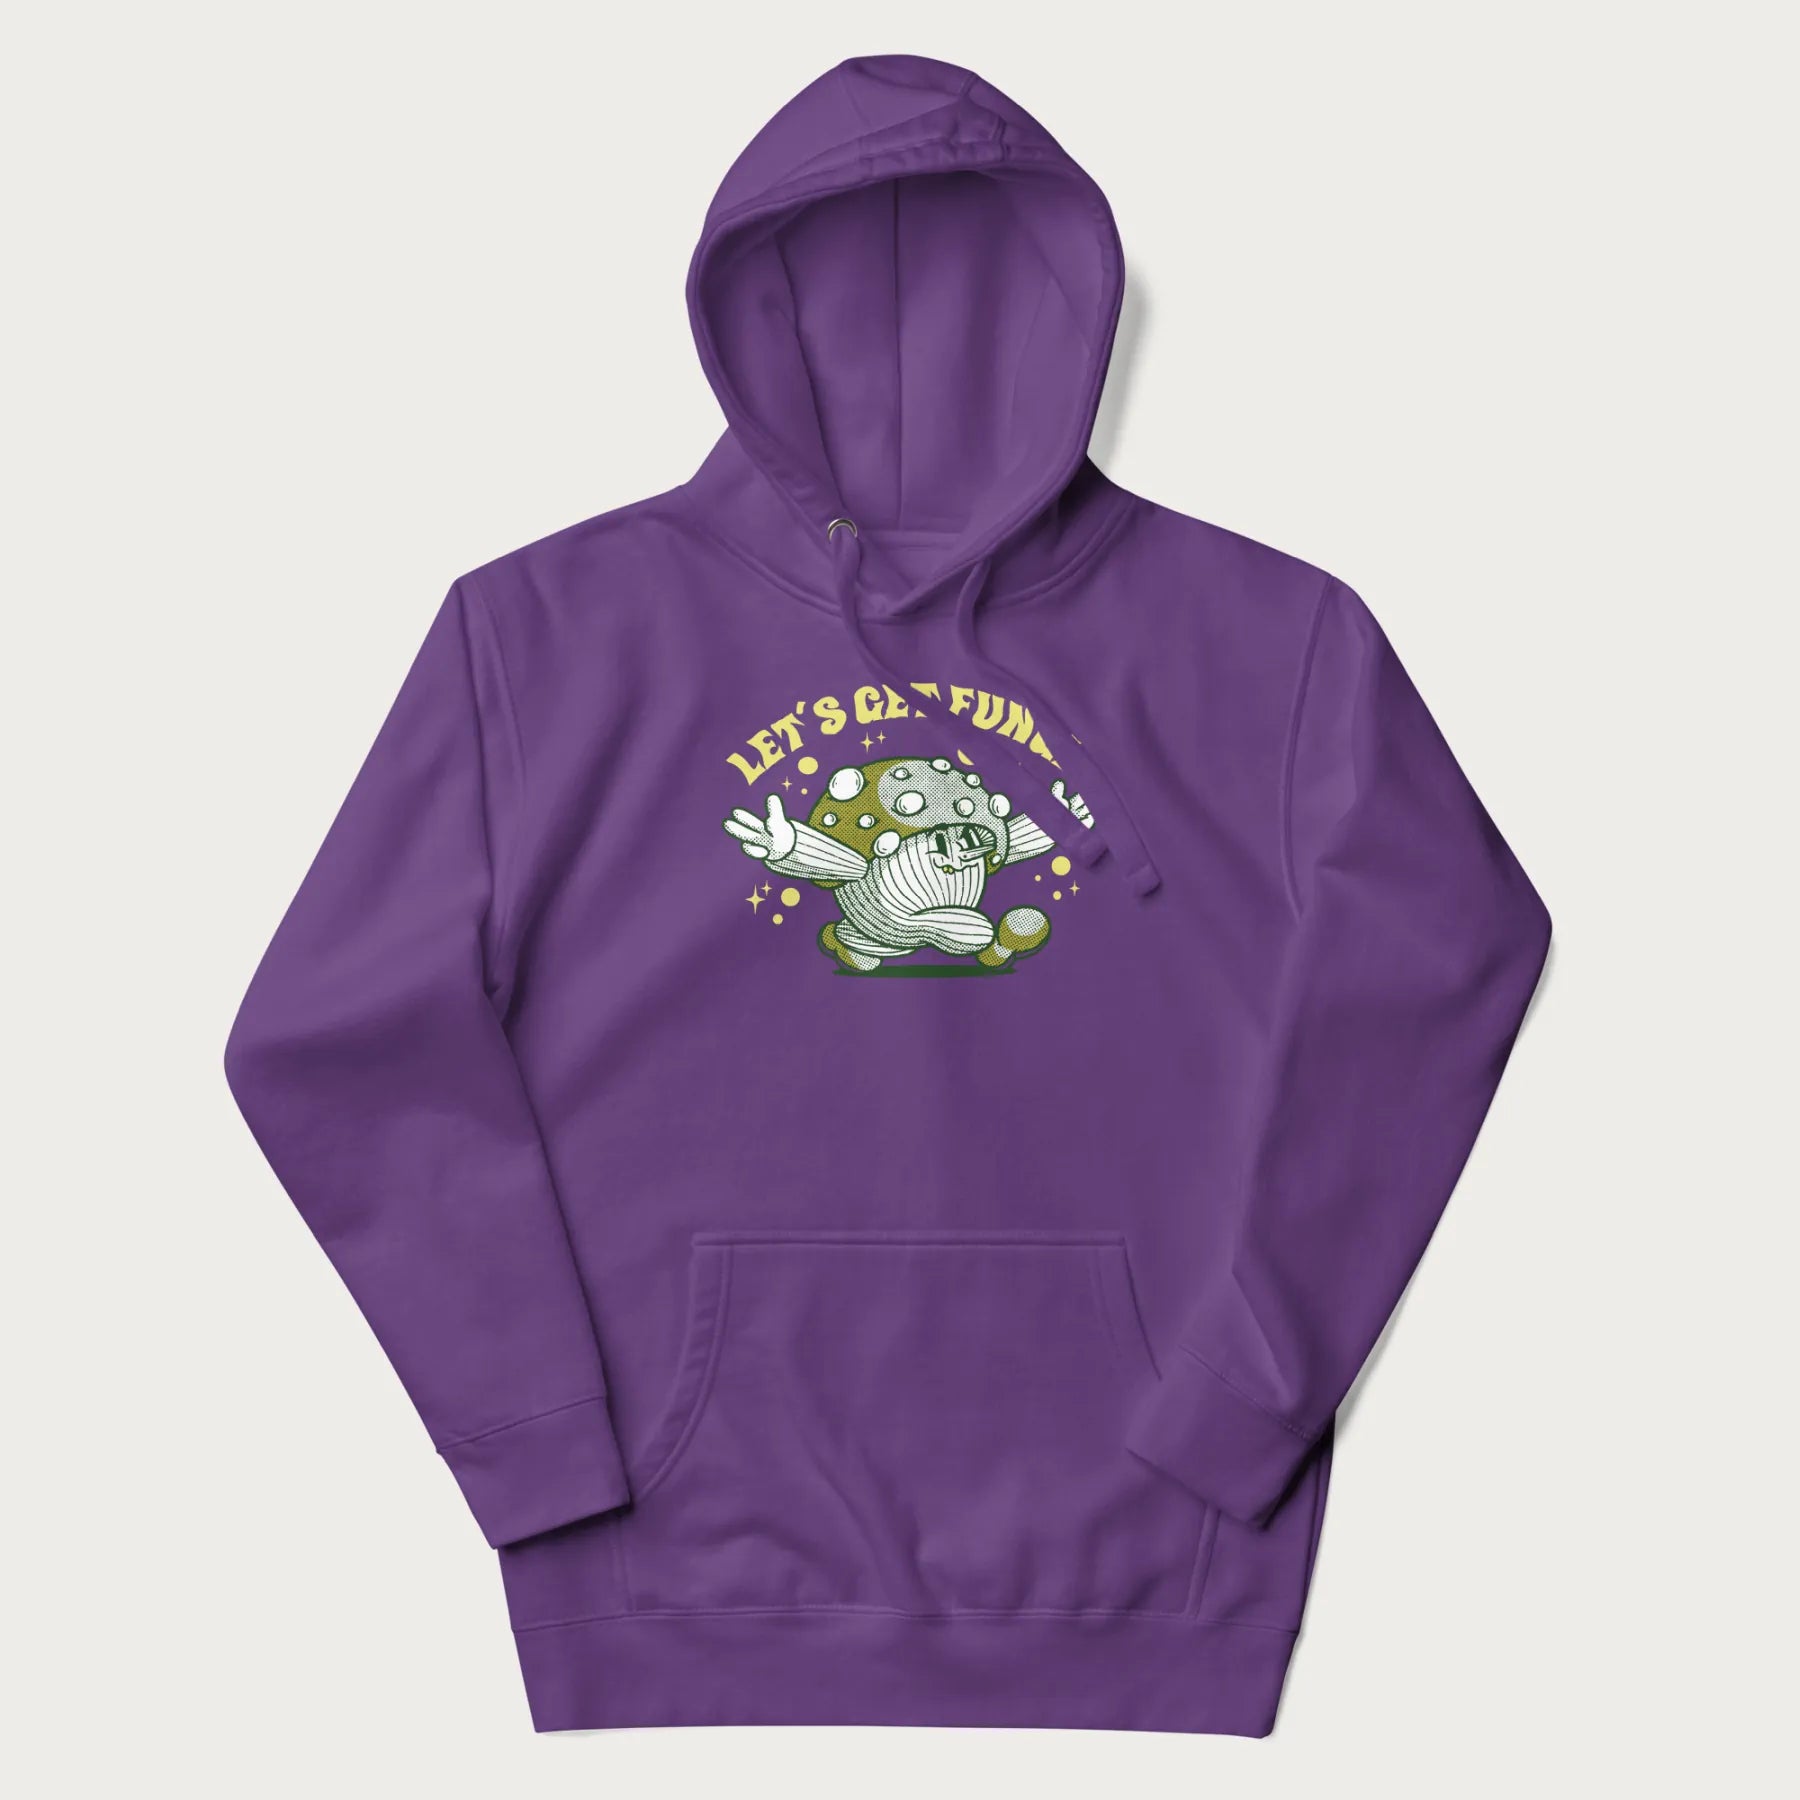 Purple hoodie with a retro-inspired graphic of a mushroom mascot character and the text 'Let's Get Fungi'.